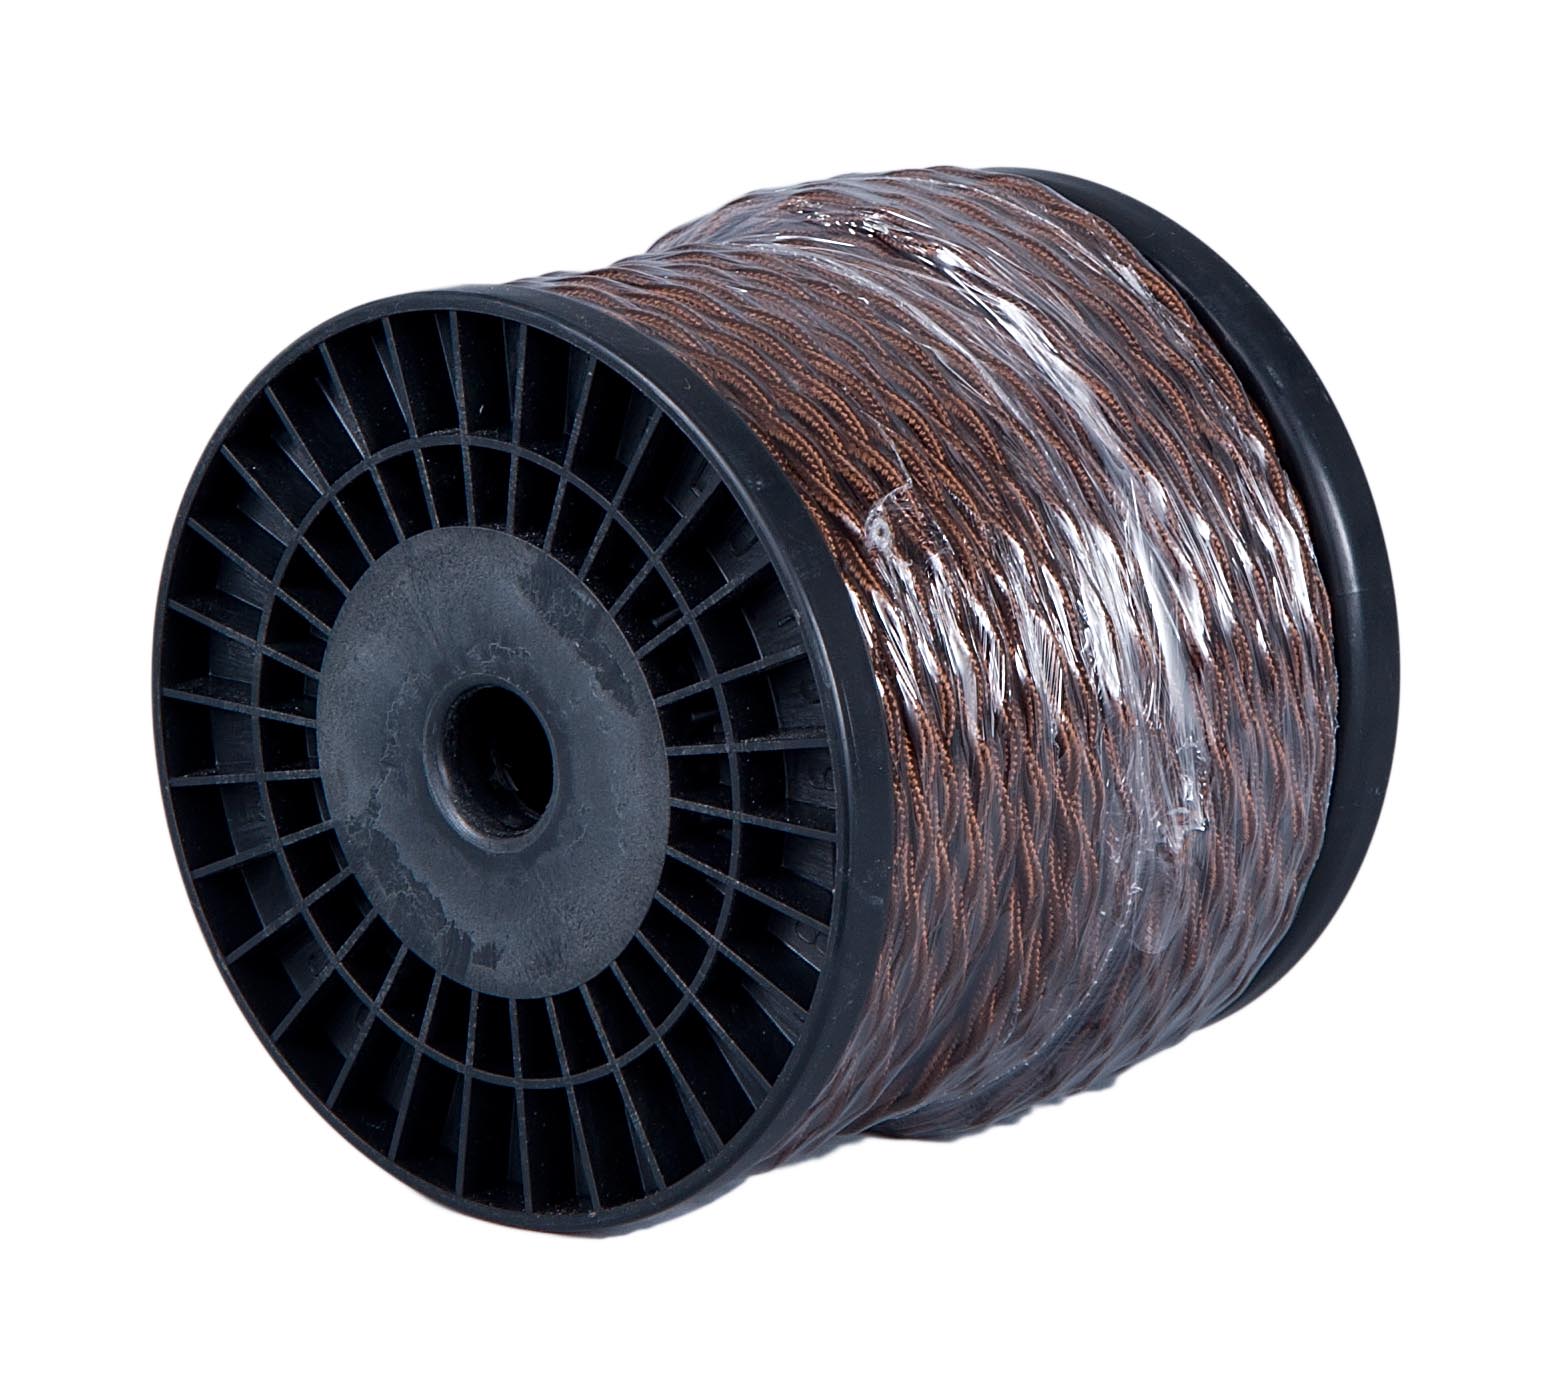 Fabric Covered, Twisted Pair Lamp Cord - Wire, Bulk Spool or By-The-Foot, CHOICE of 2 COLORS